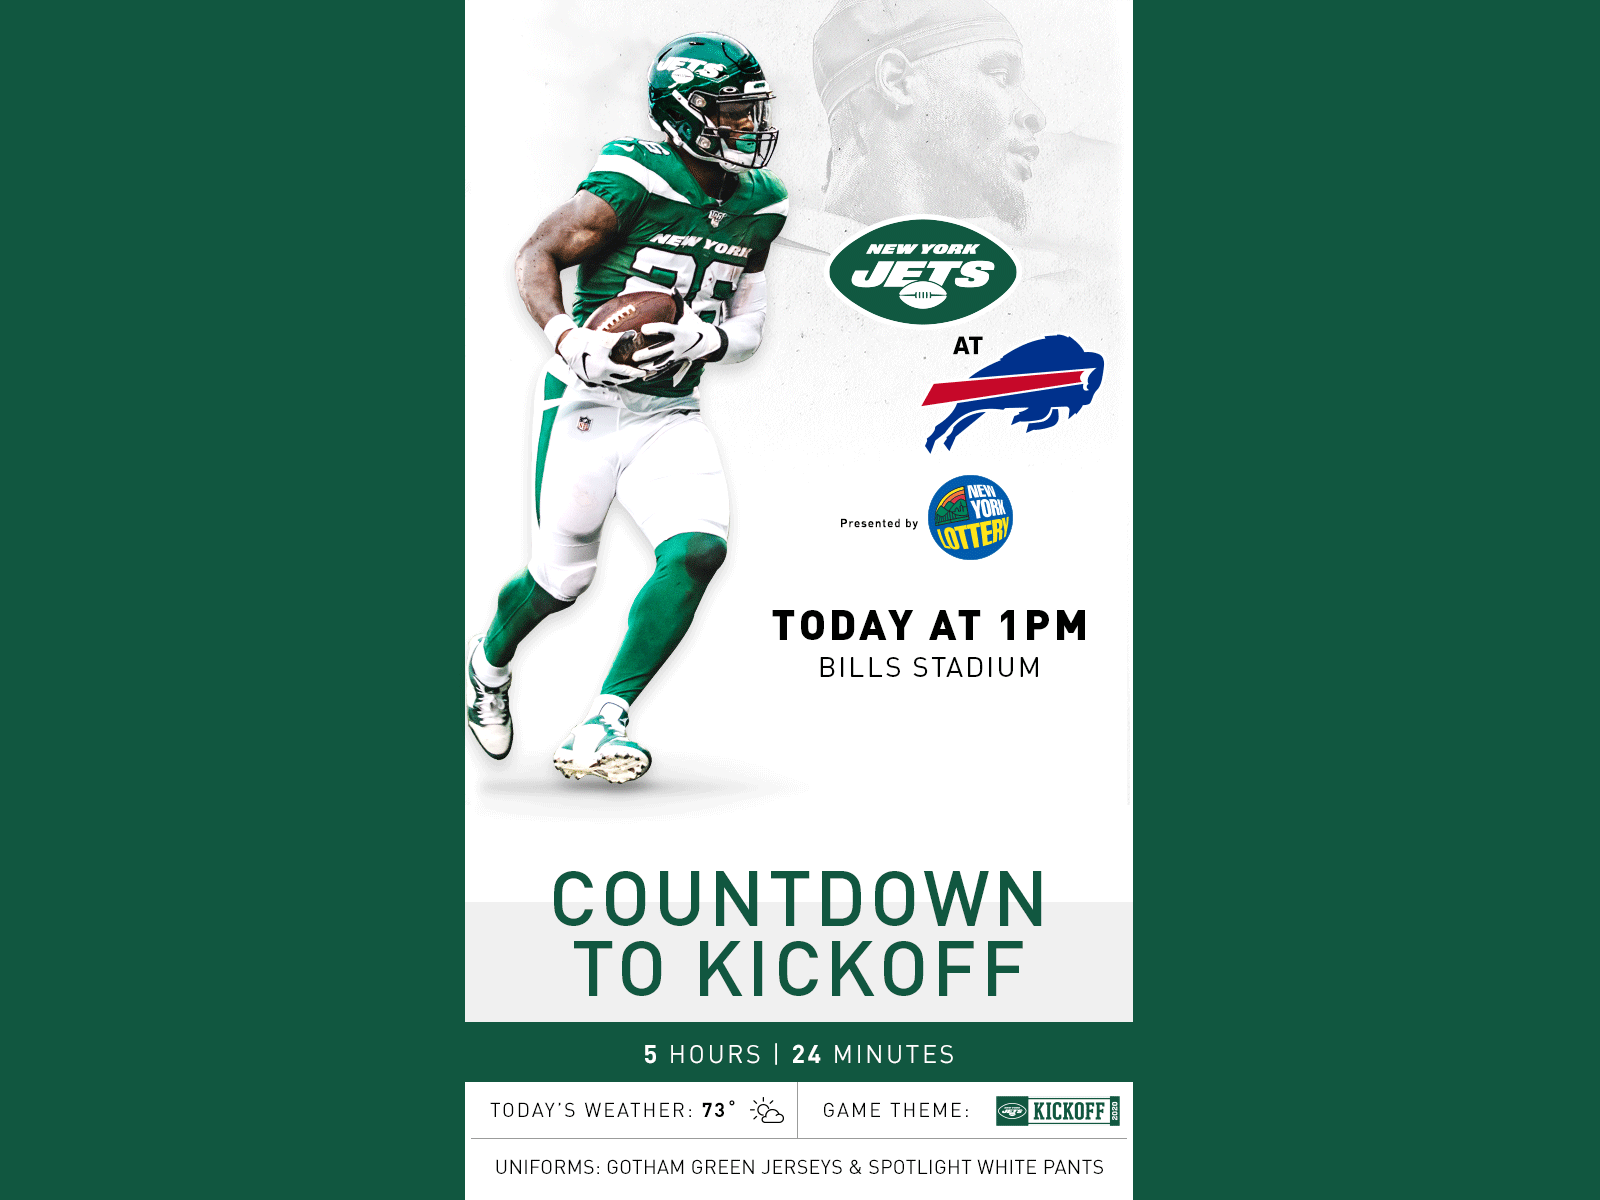 EMAIL JETS VS BILLS creative design email football graphic design jets new york new york city new york jets nfl photoshop typography